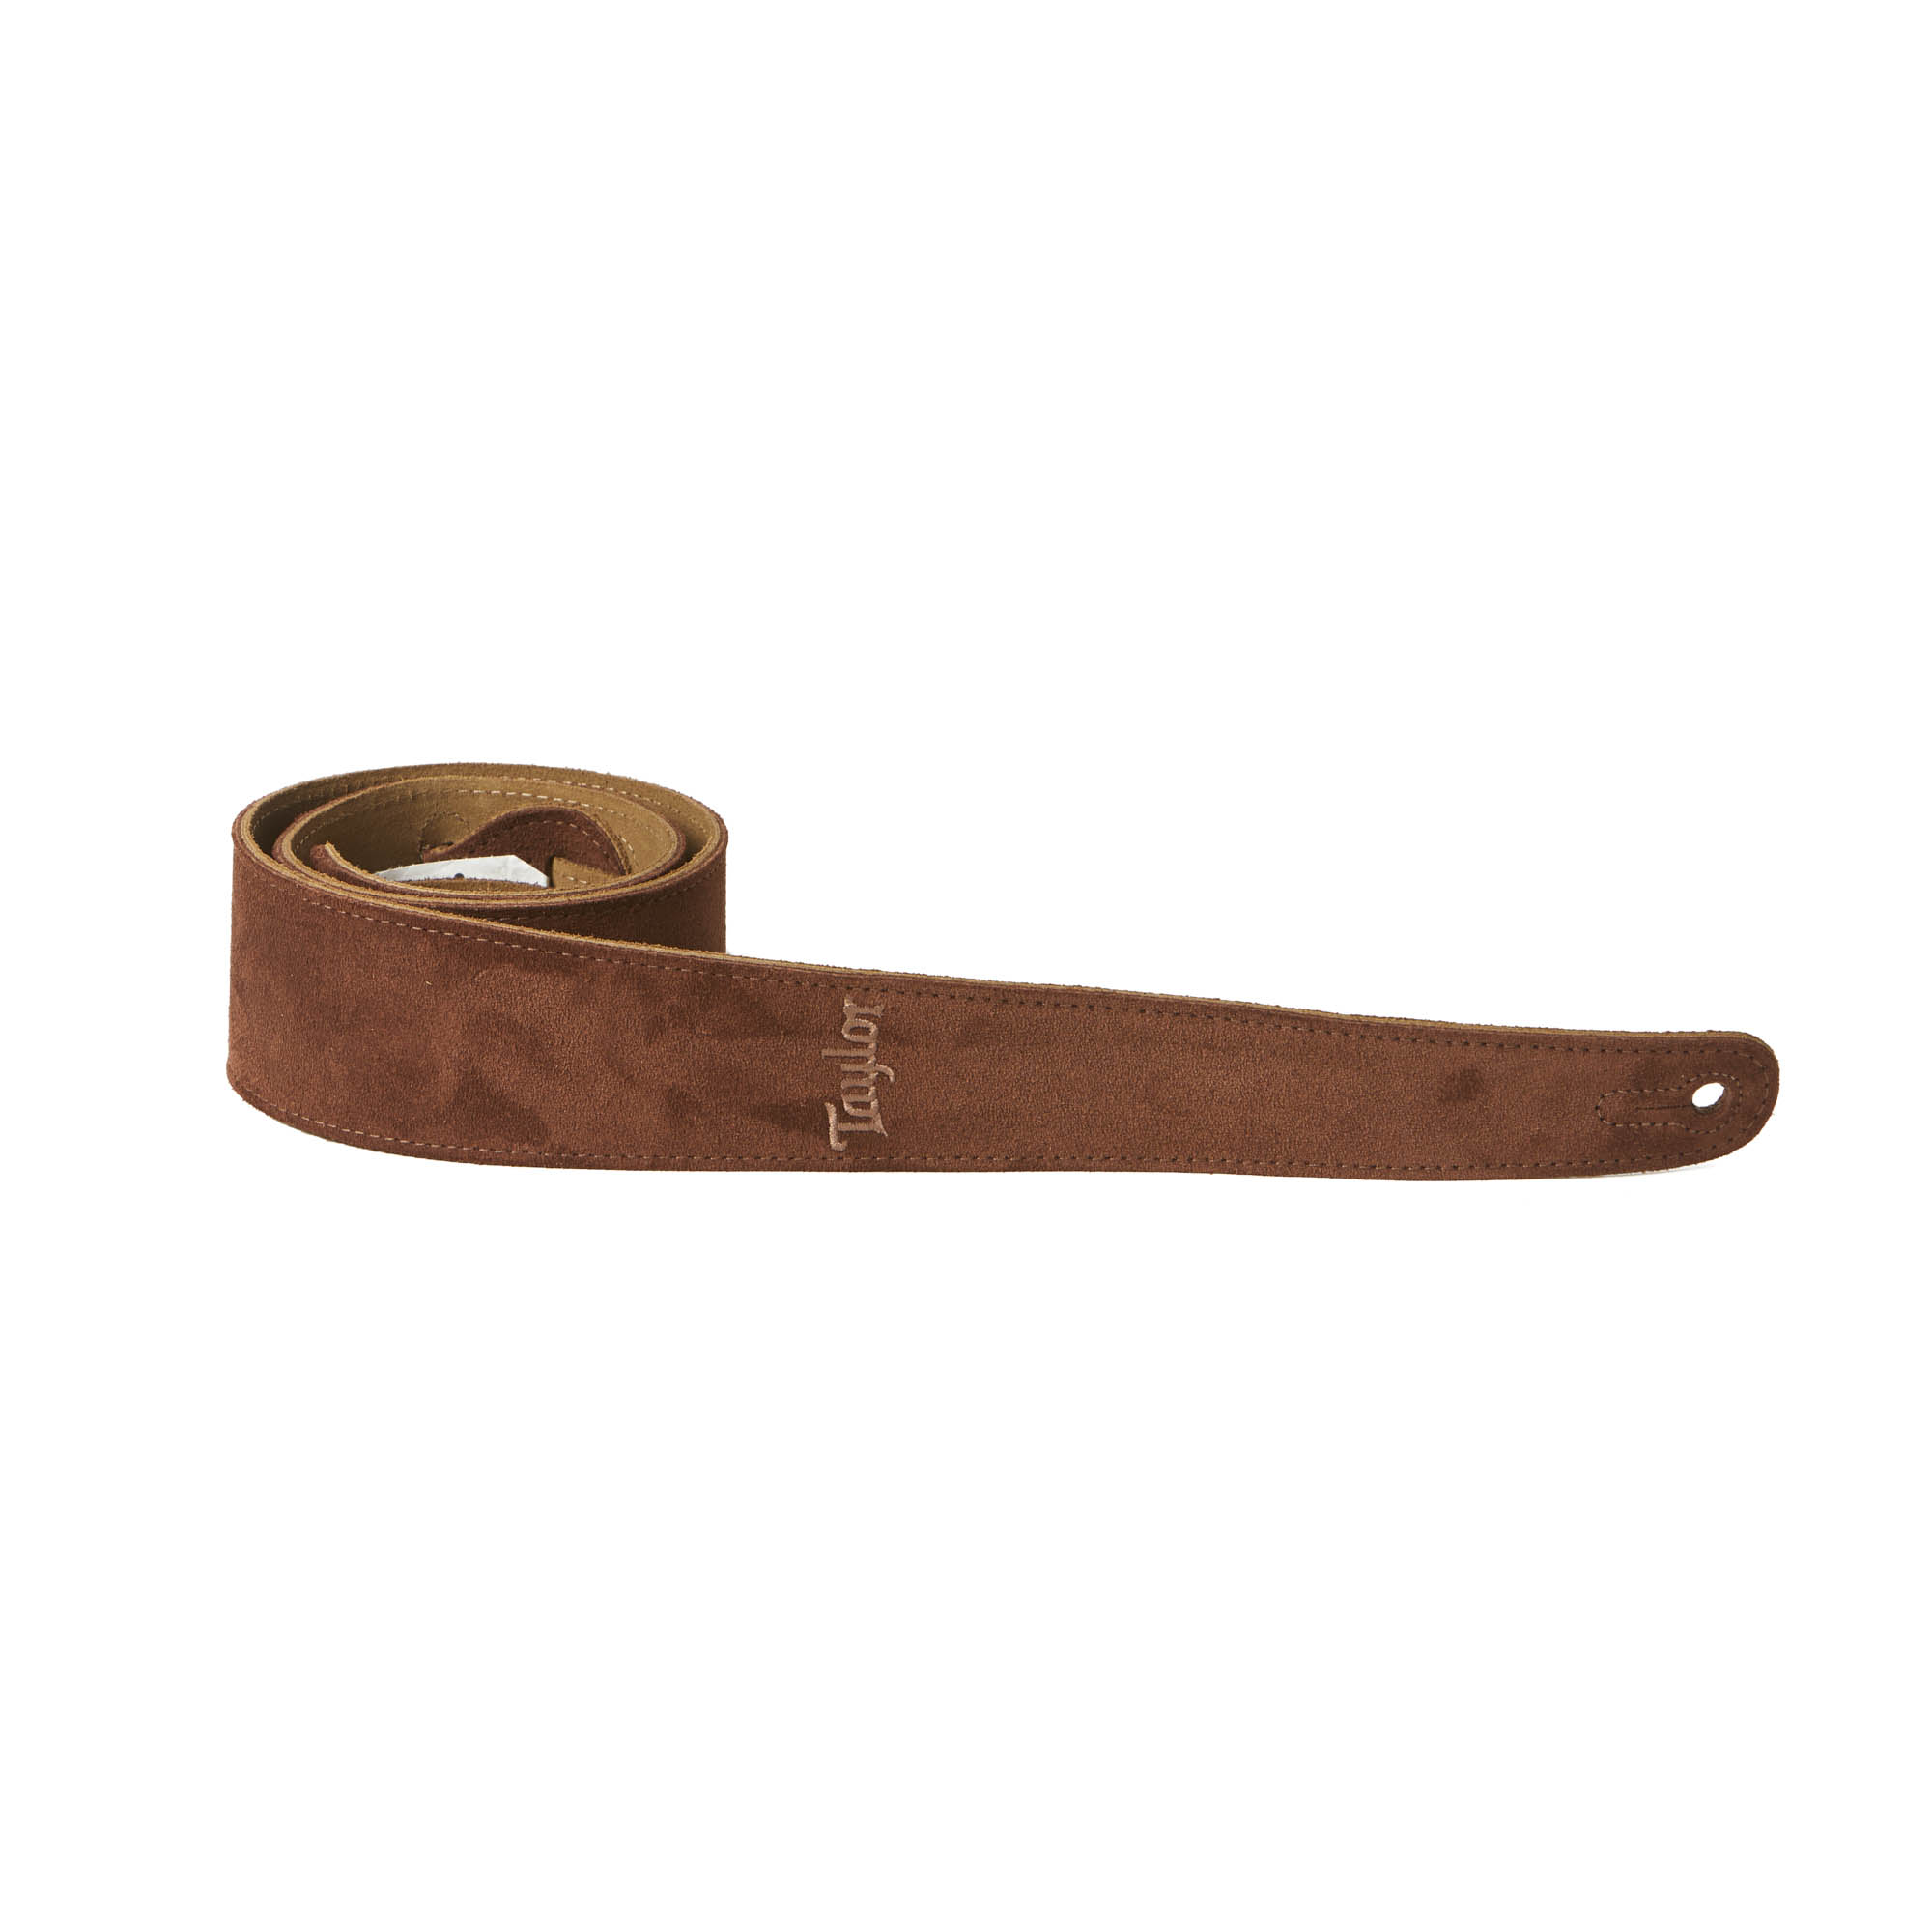 An image of Taylor TS250-05 Suede Guitar Strap, Chocolate Brown - Gift for a Guitarist | PMT...